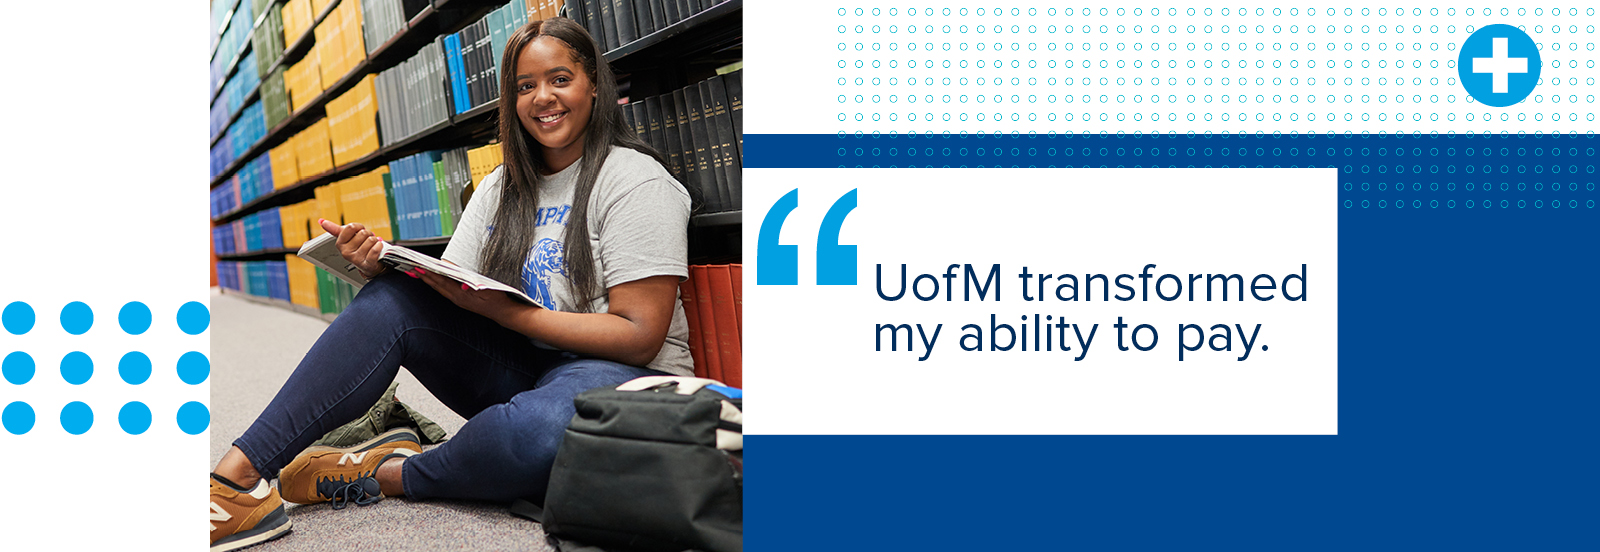 "UofM transformed my ability to pay."